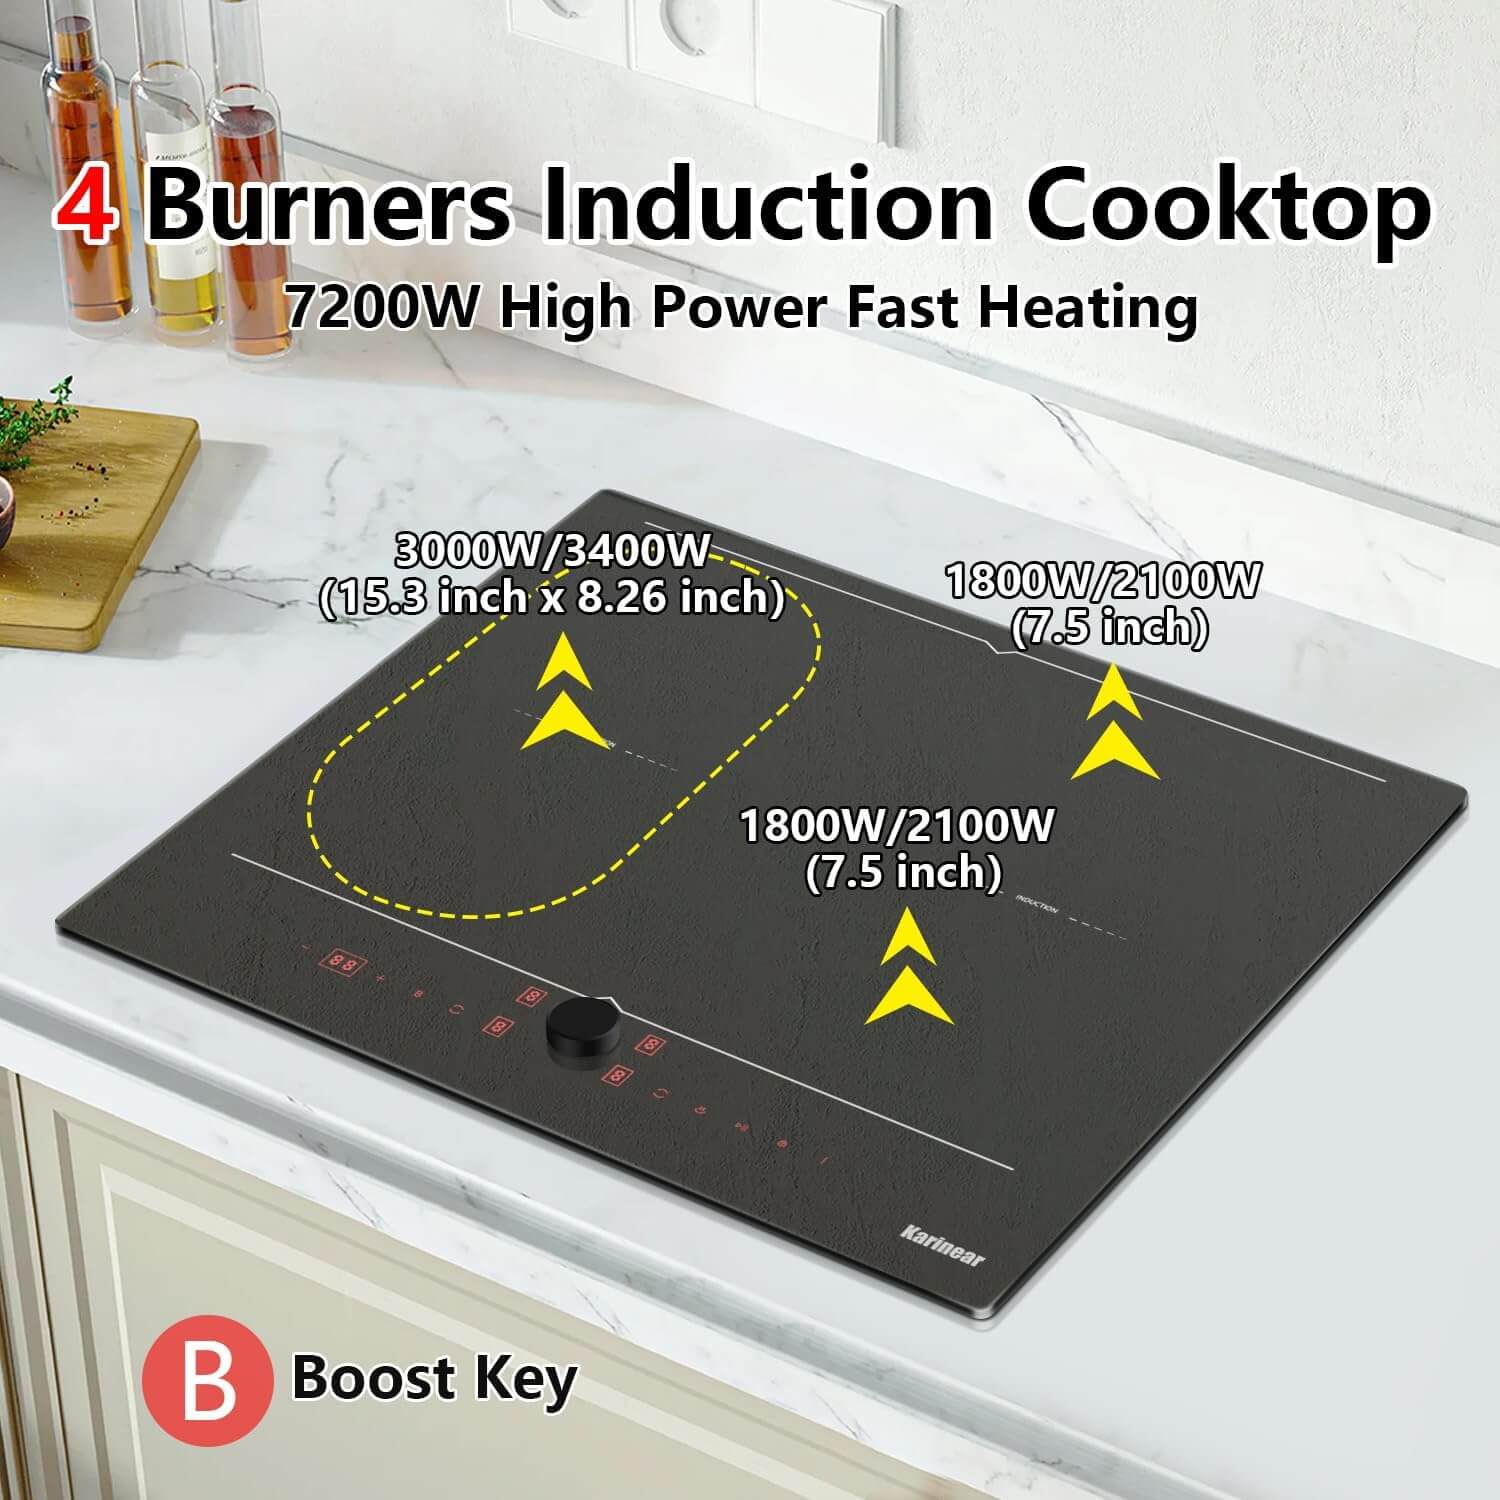 Karinear 24 Inch Induction Cooktop 4 Burners, Hidden Display with Magnetic Knob Control, Built-in Induction Stovetop with Heating Flex Zone, Boost, Timer, Pause Function, 7200W, 220-240V(No Plug)